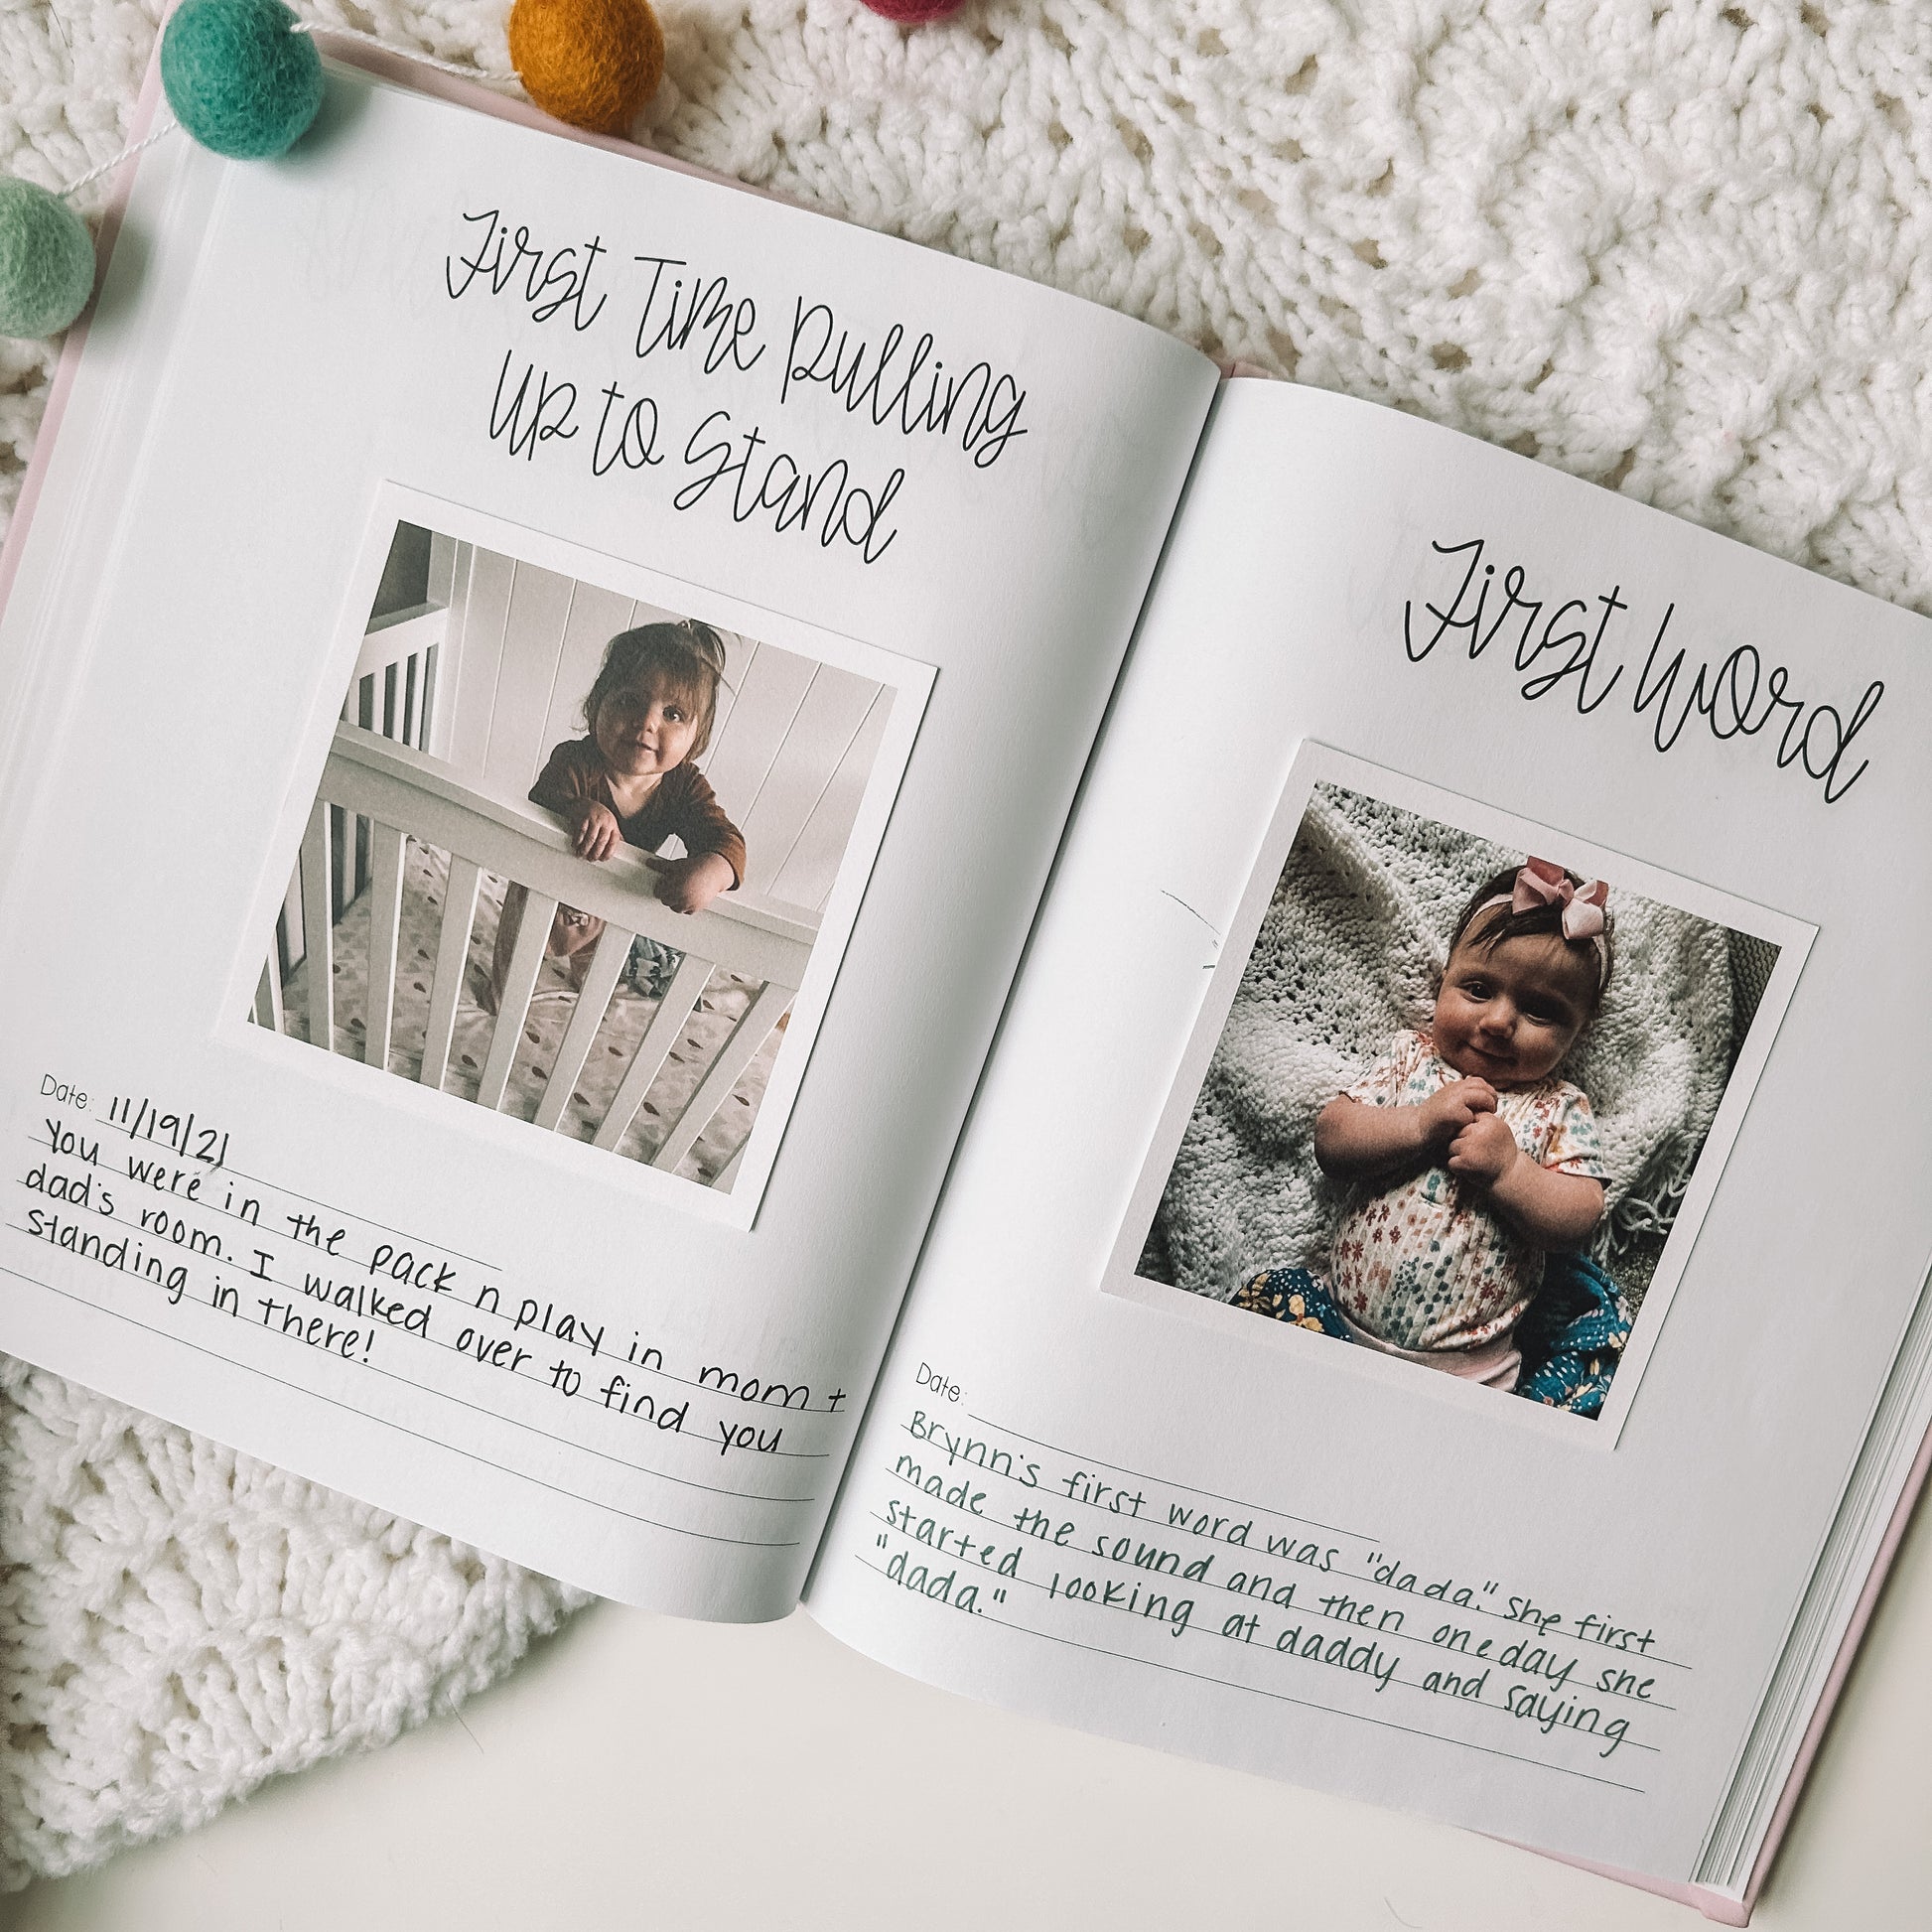 Baby firsts pages include a space for a photo, the date, and a few lines to write about the milestone. This two page spread is first time pulling up to stand and first word.